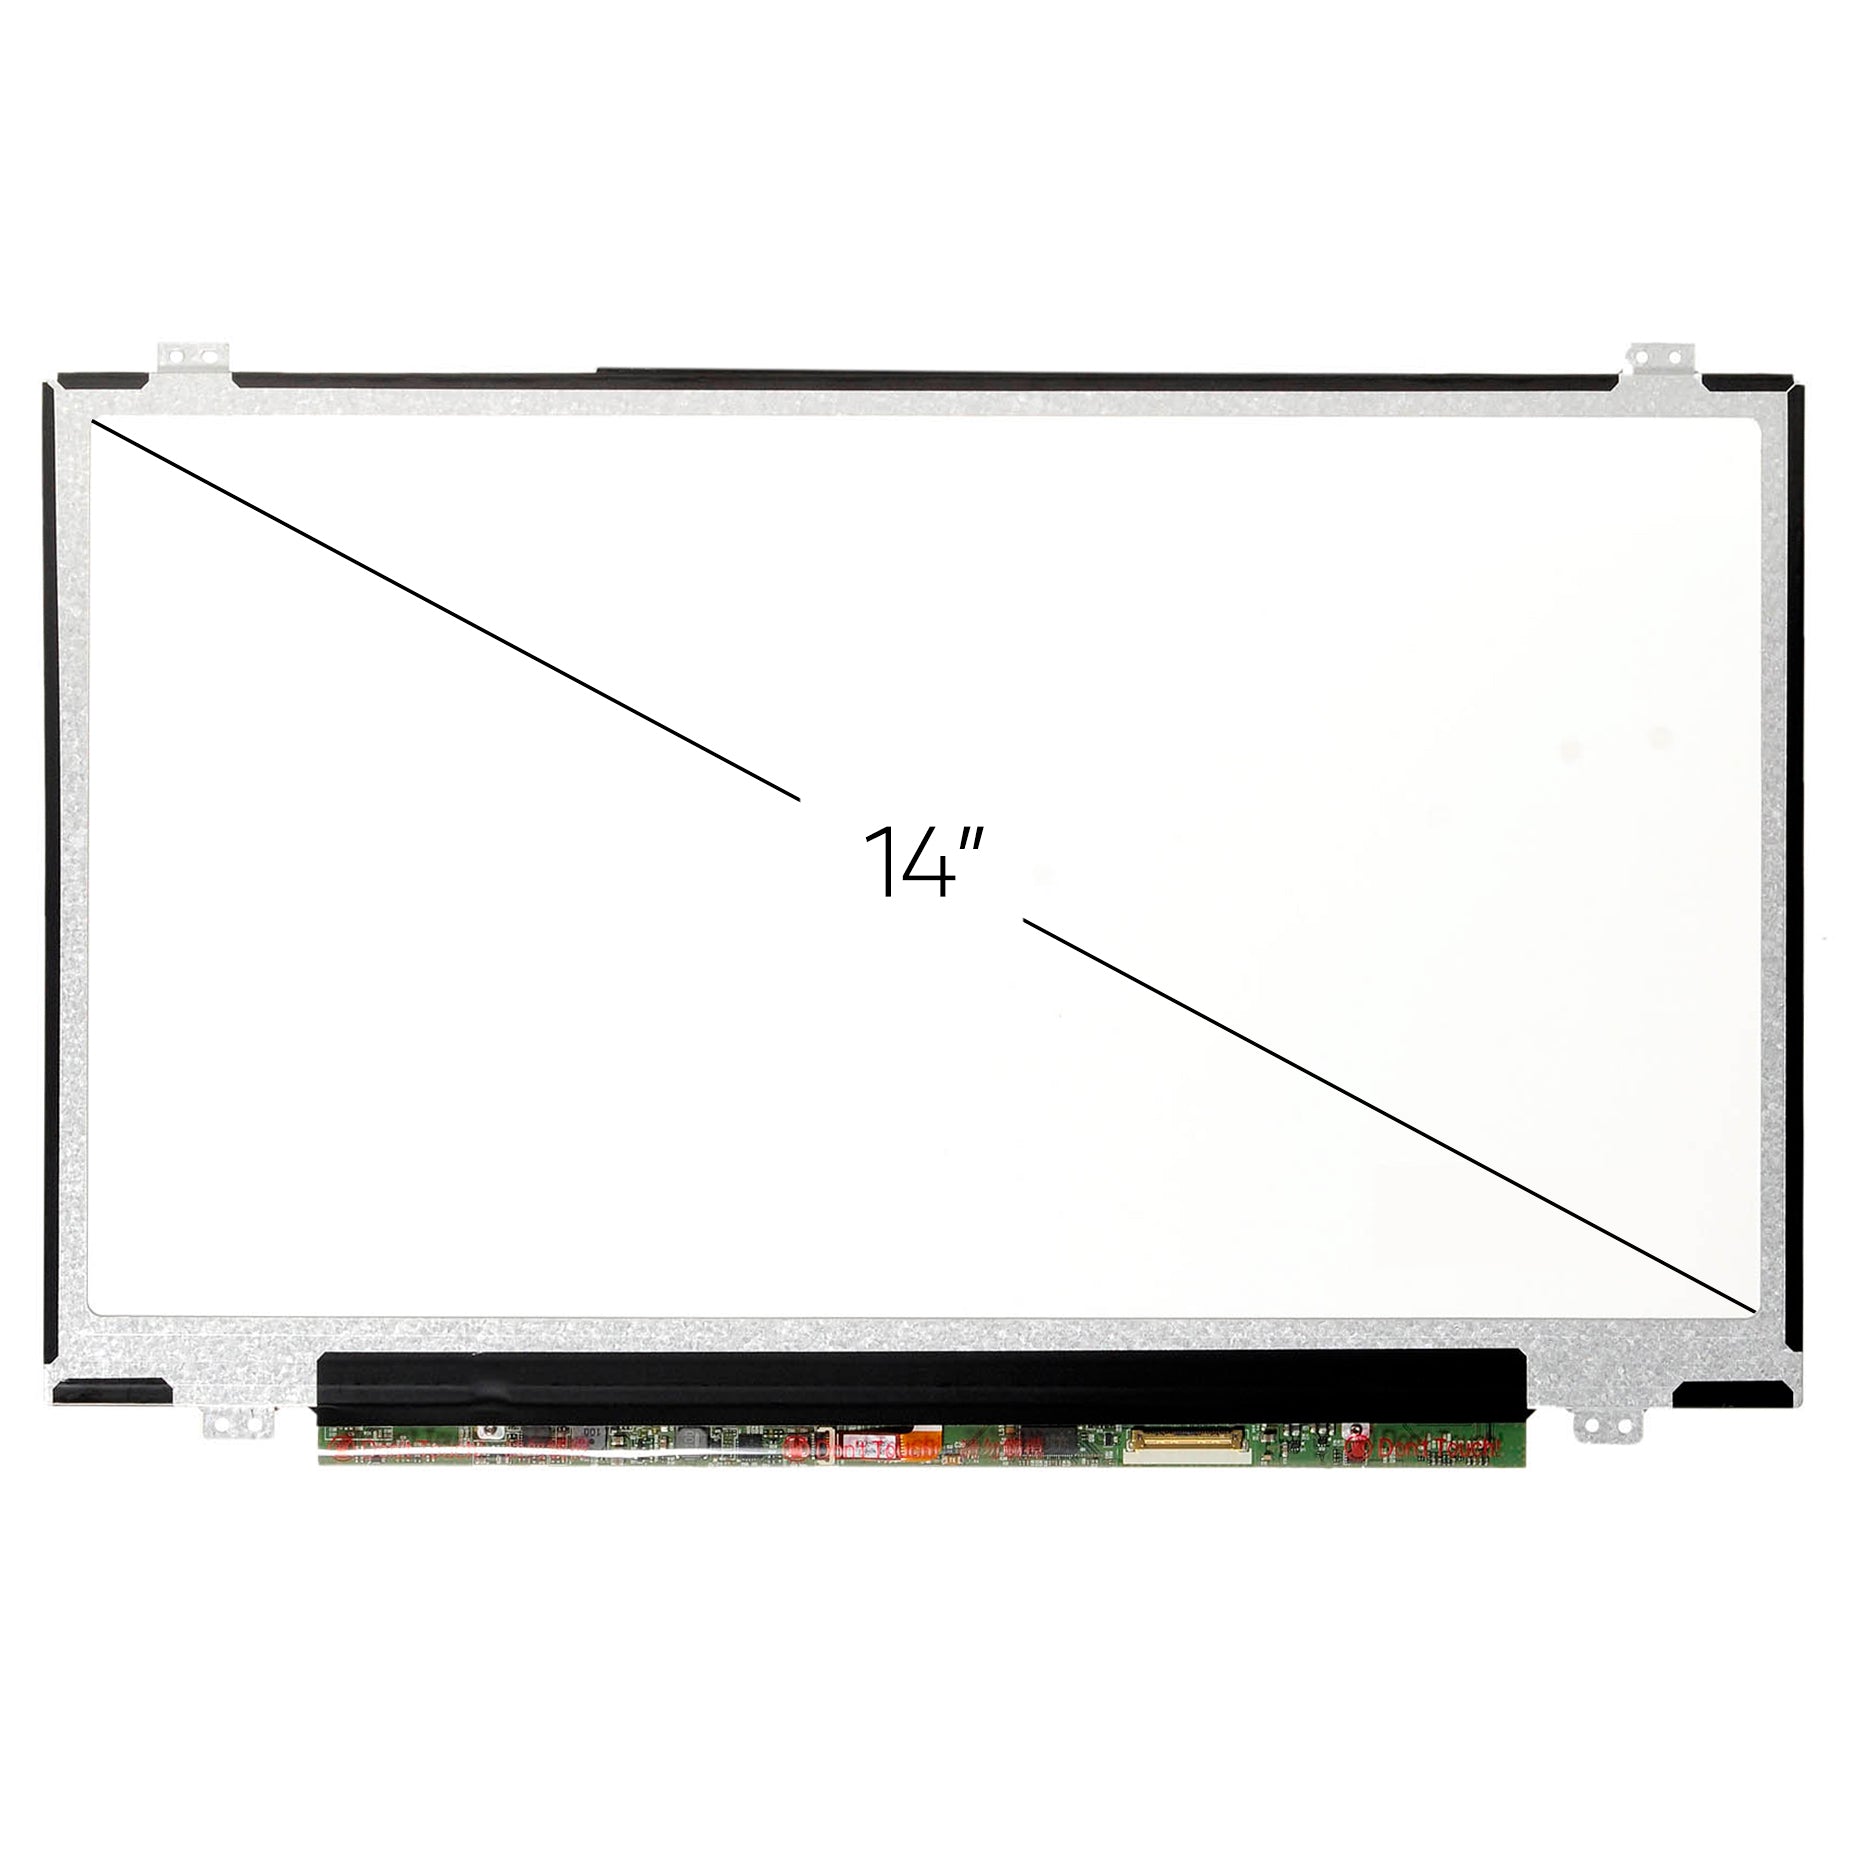 Screen Replacement for Dell P/N 0MJ2P DP/N 00MJ2P FHD 1920x1080 IPS Matte LCD LED Display